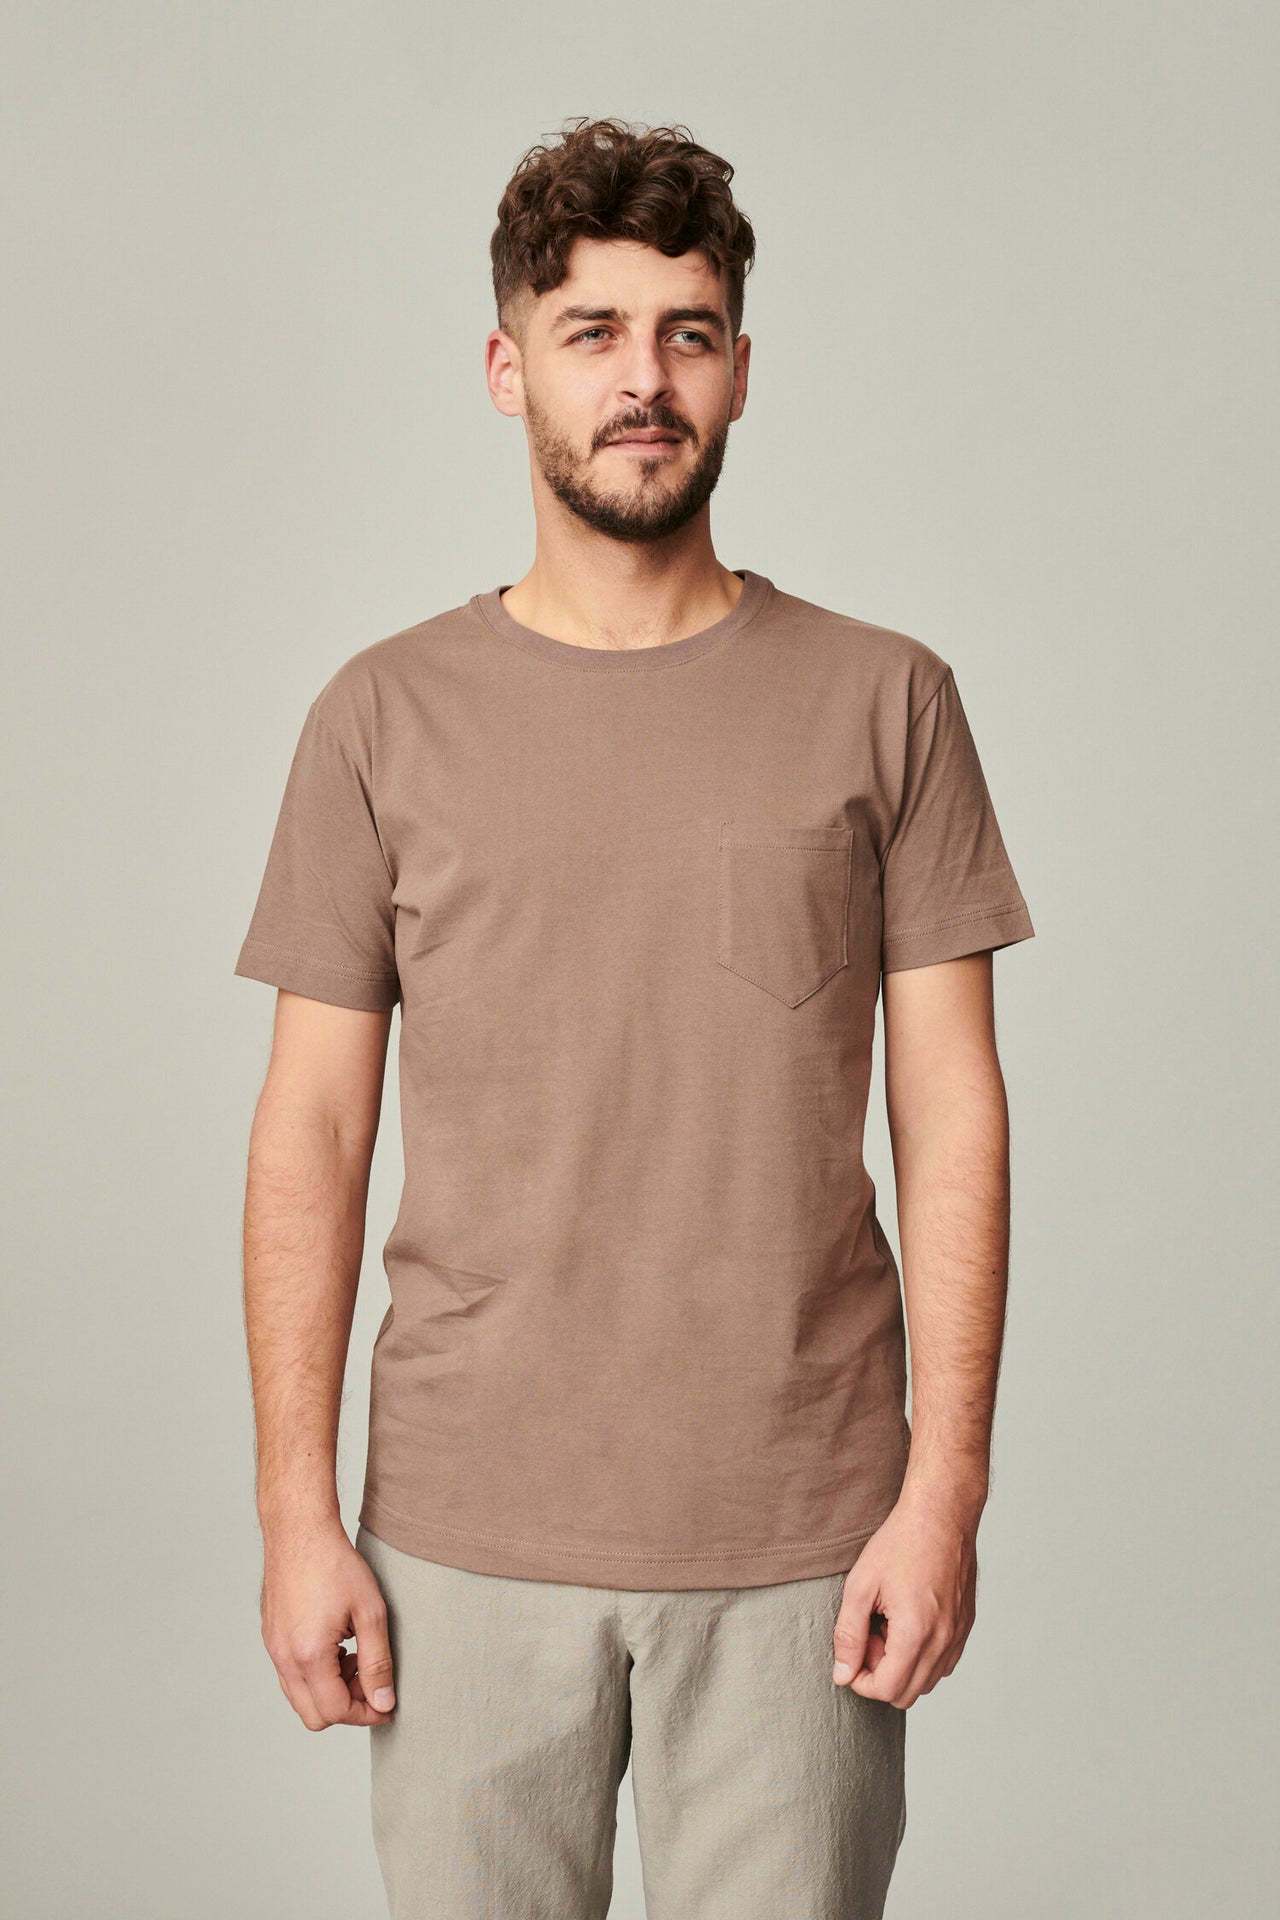 Pocket T-Shirt in a Taupe Japanese Organic Cotton Jersey